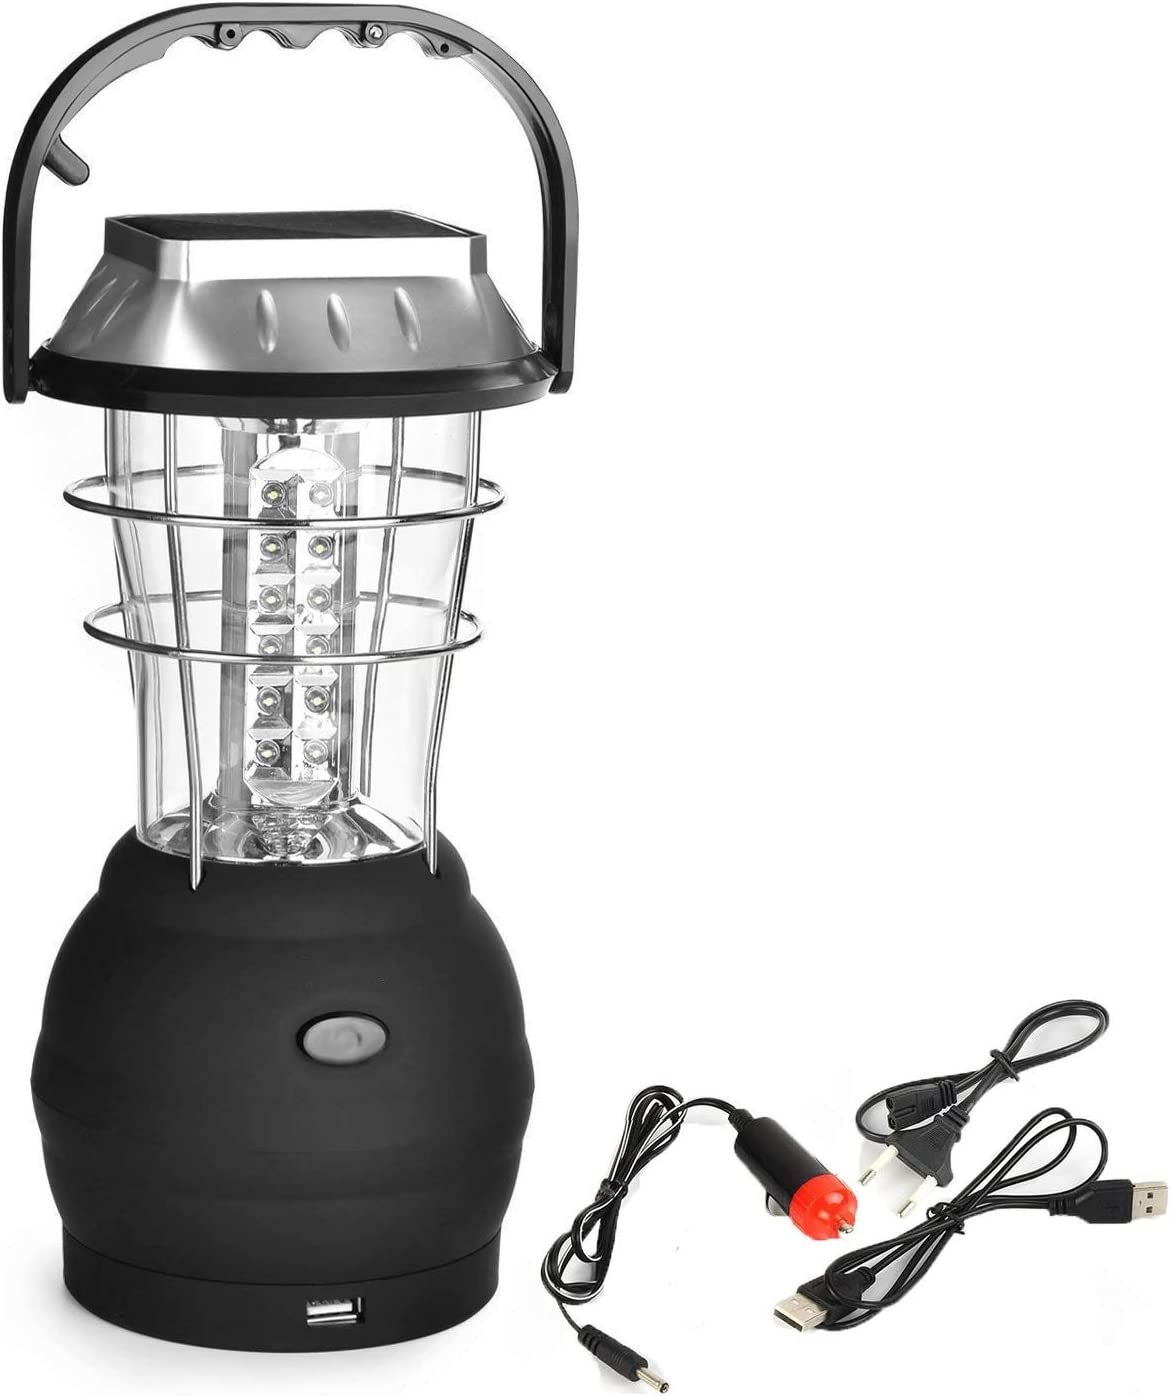 Xhope 36 LED Solar Lantern,5 Mode Hand Crank Dynamo Rechargeable Camping Lantern Emergency,LED Camping Lights for Outdoor Hiking Fishing Outages and Emergencies Tent,Backpacking,Camping,Casual,Travel